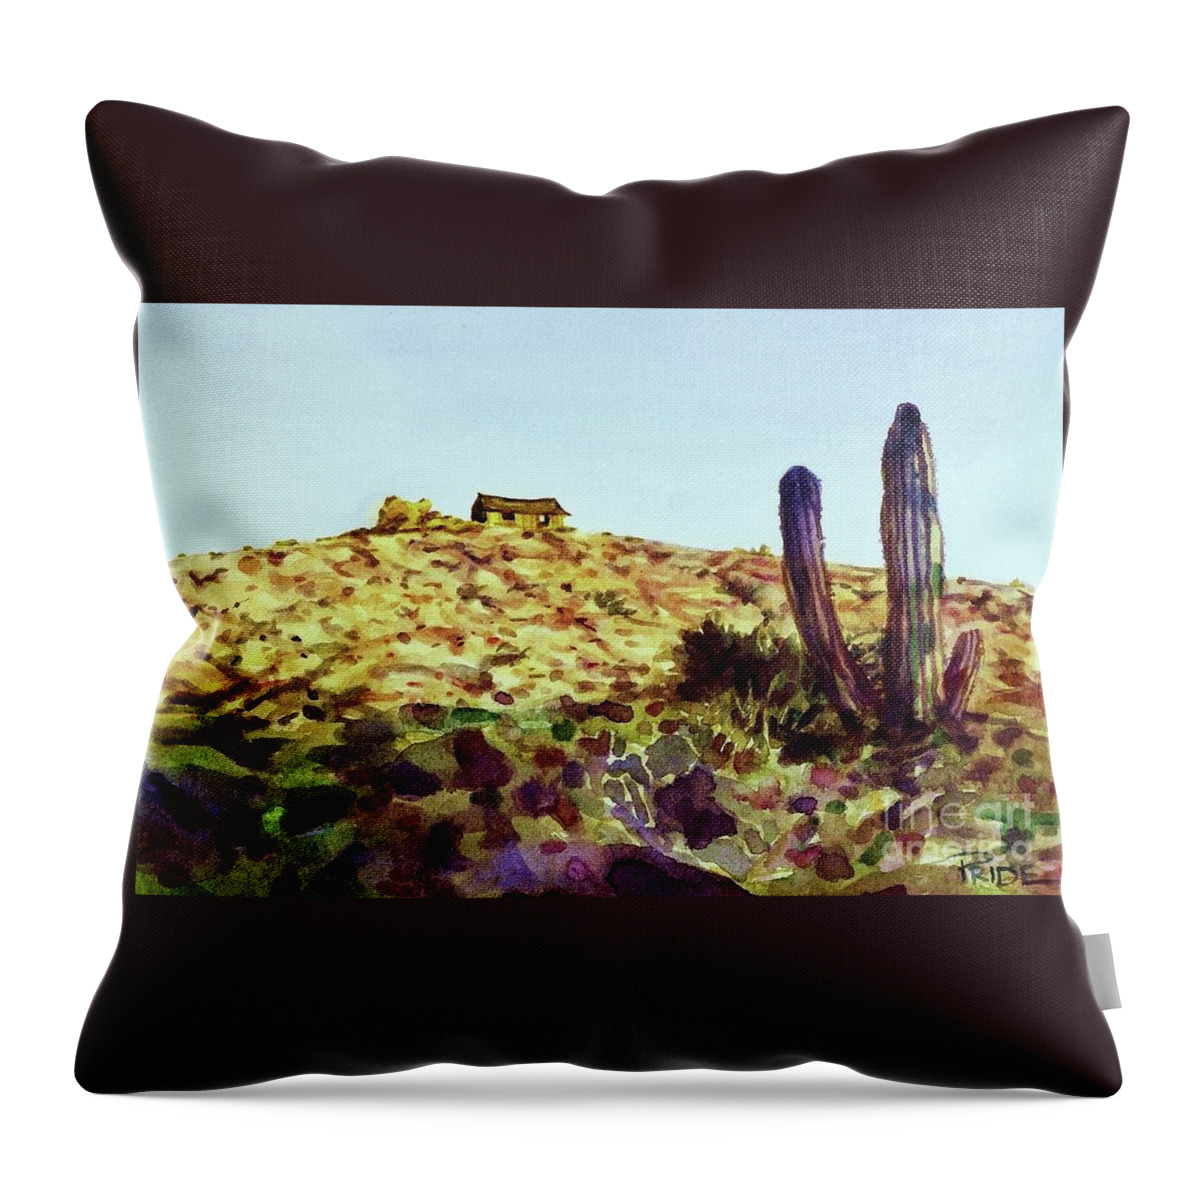 Cynthia Pride Watercolor Paintings Throw Pillow featuring the painting The Desert Place by Cynthia Pride